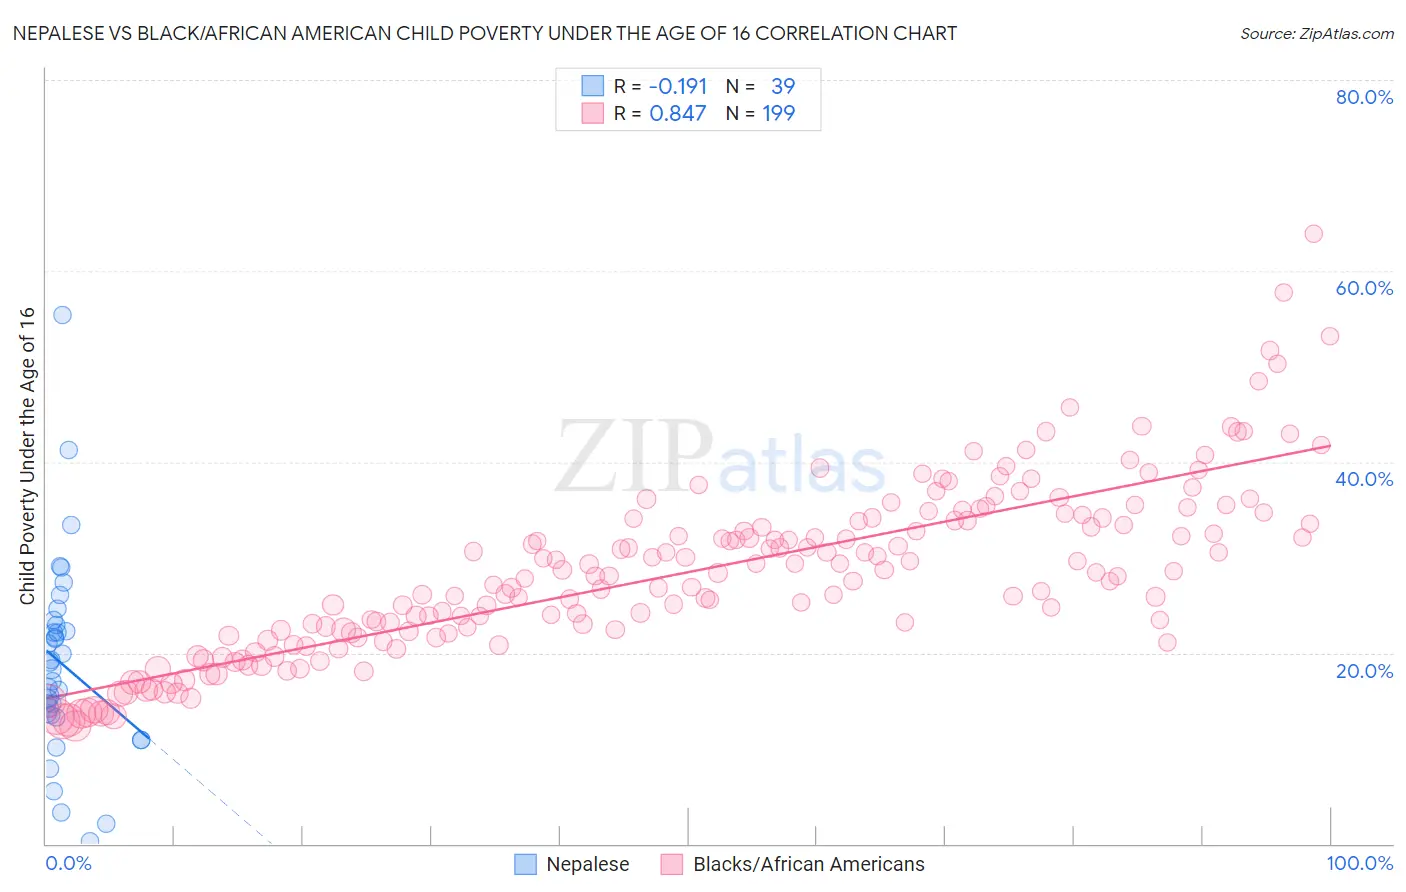 Nepalese vs Black/African American Child Poverty Under the Age of 16